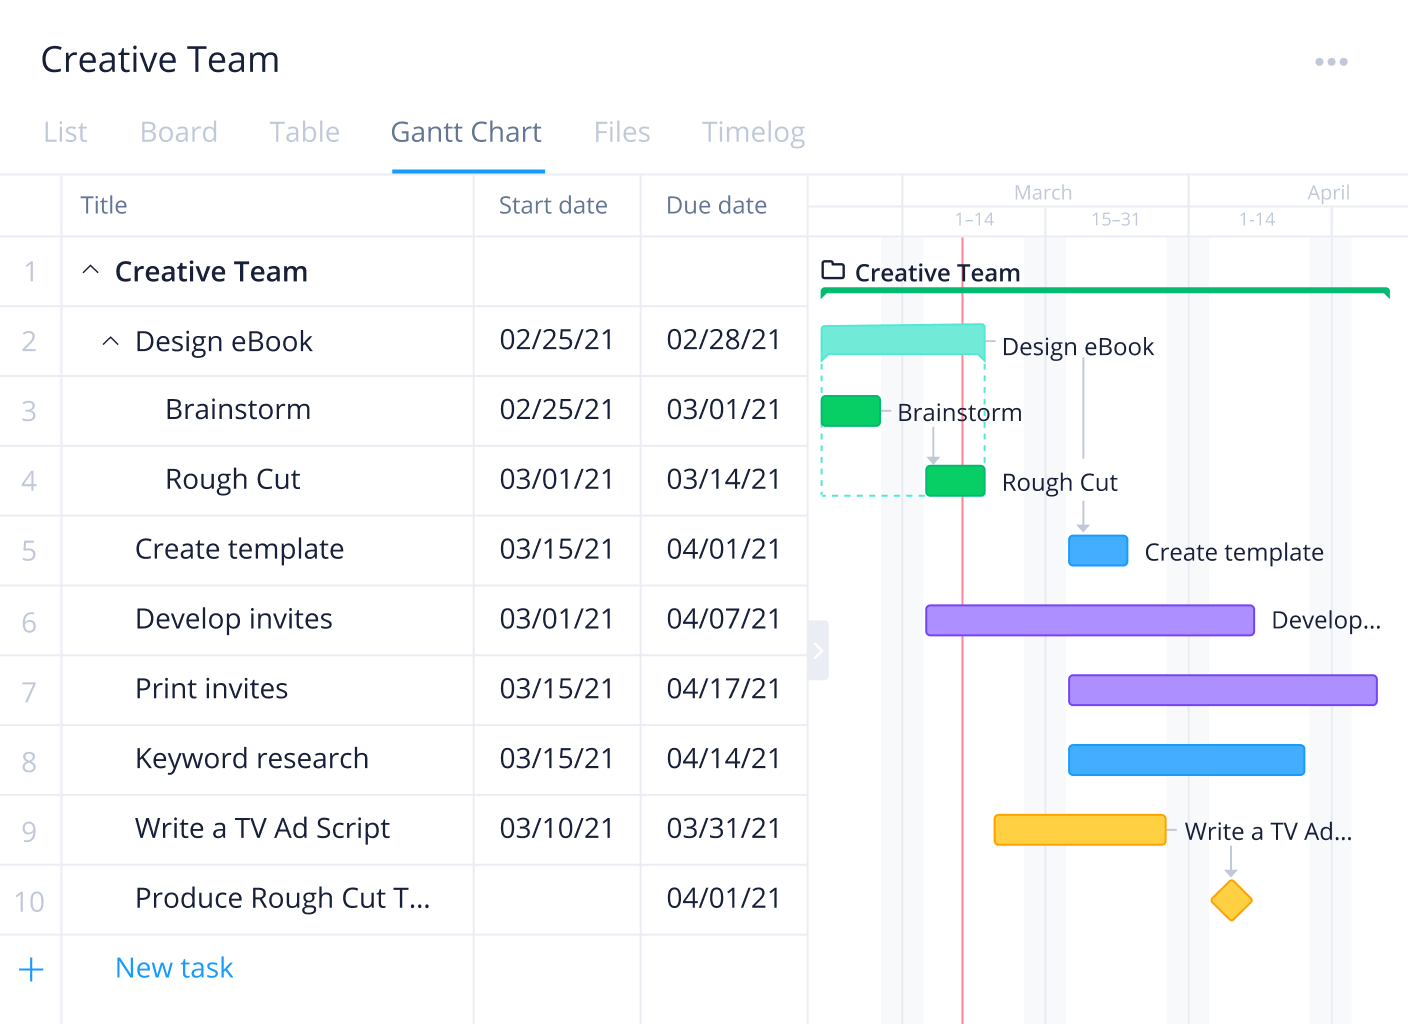 14 Best Project Management Software For Creative Agencies. #14 Wrike